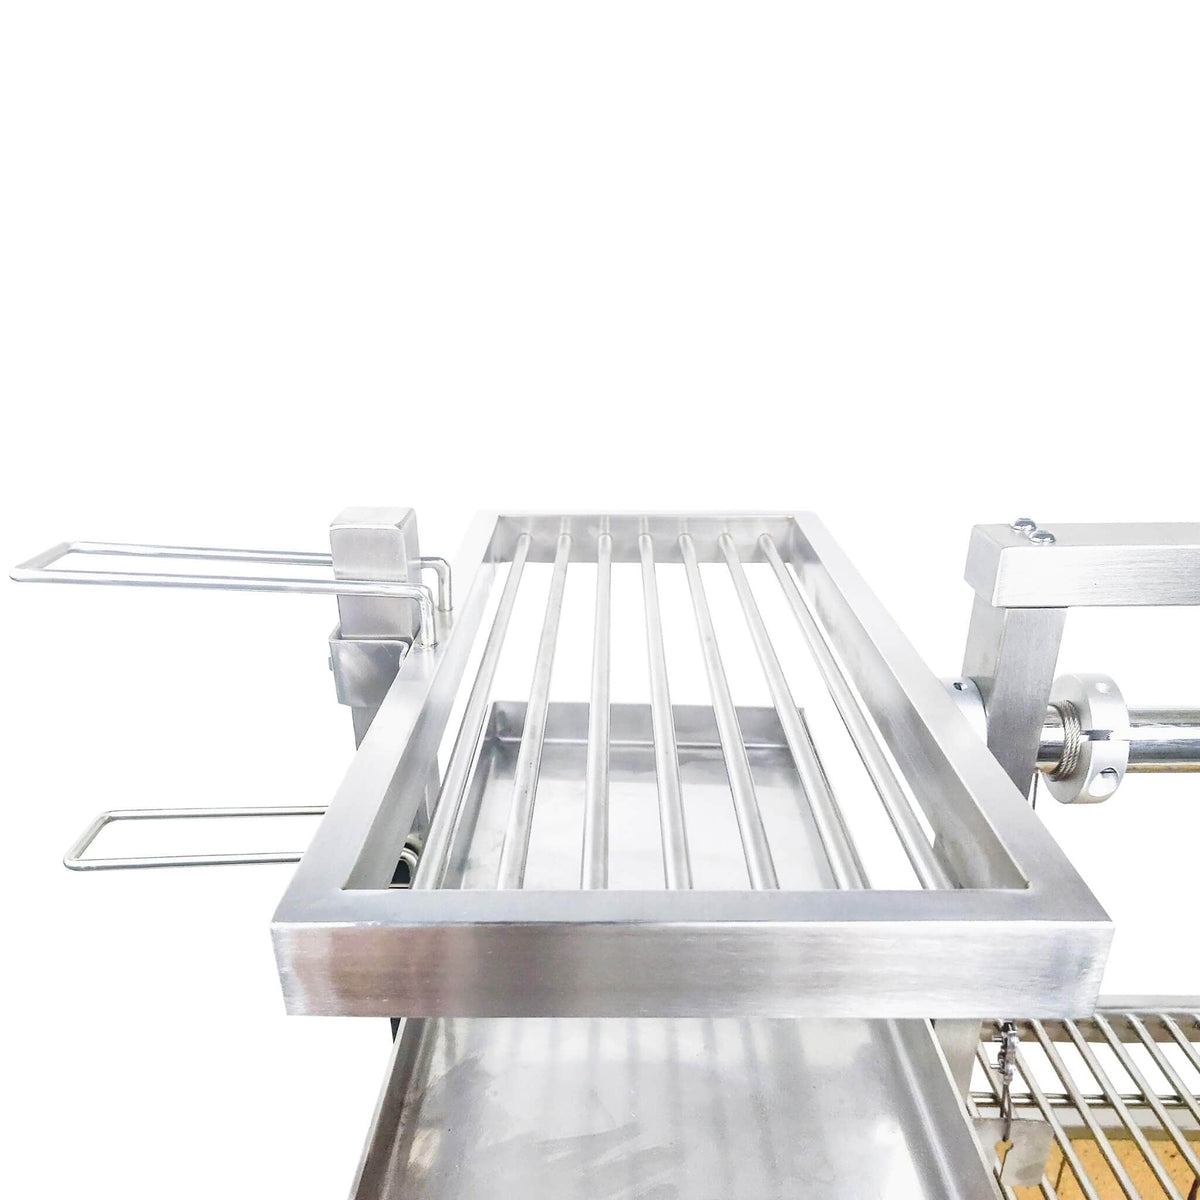 Tagwood BBQ Height Adjustable Secondary Grate